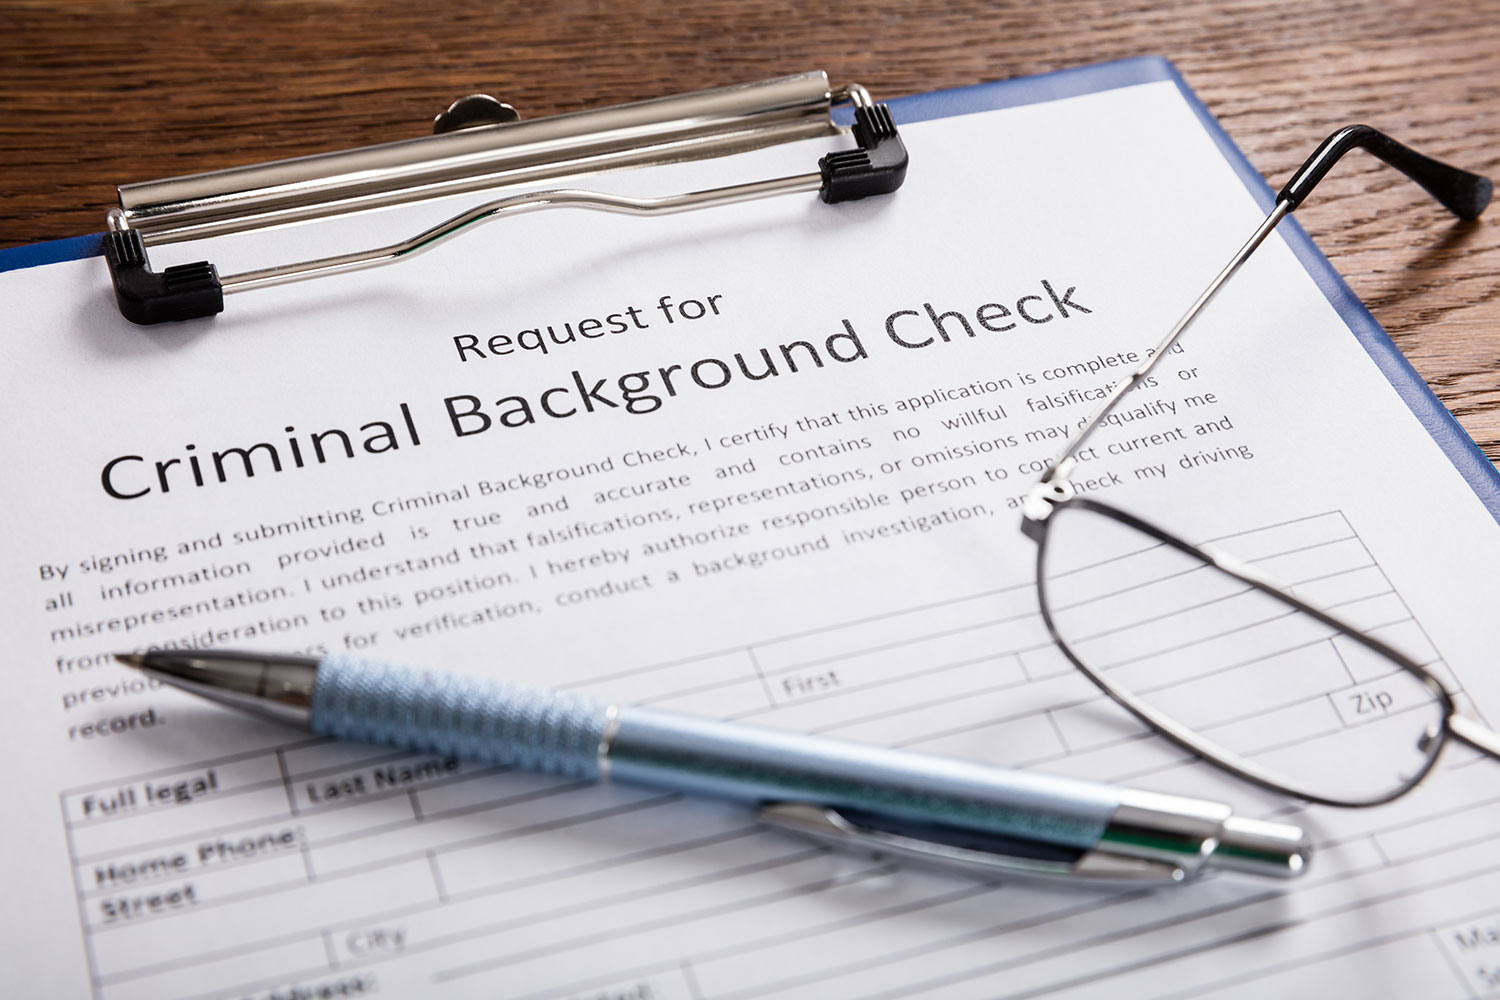 Second Chance Law in Minnesota, Request for Background Check paperwork with pen